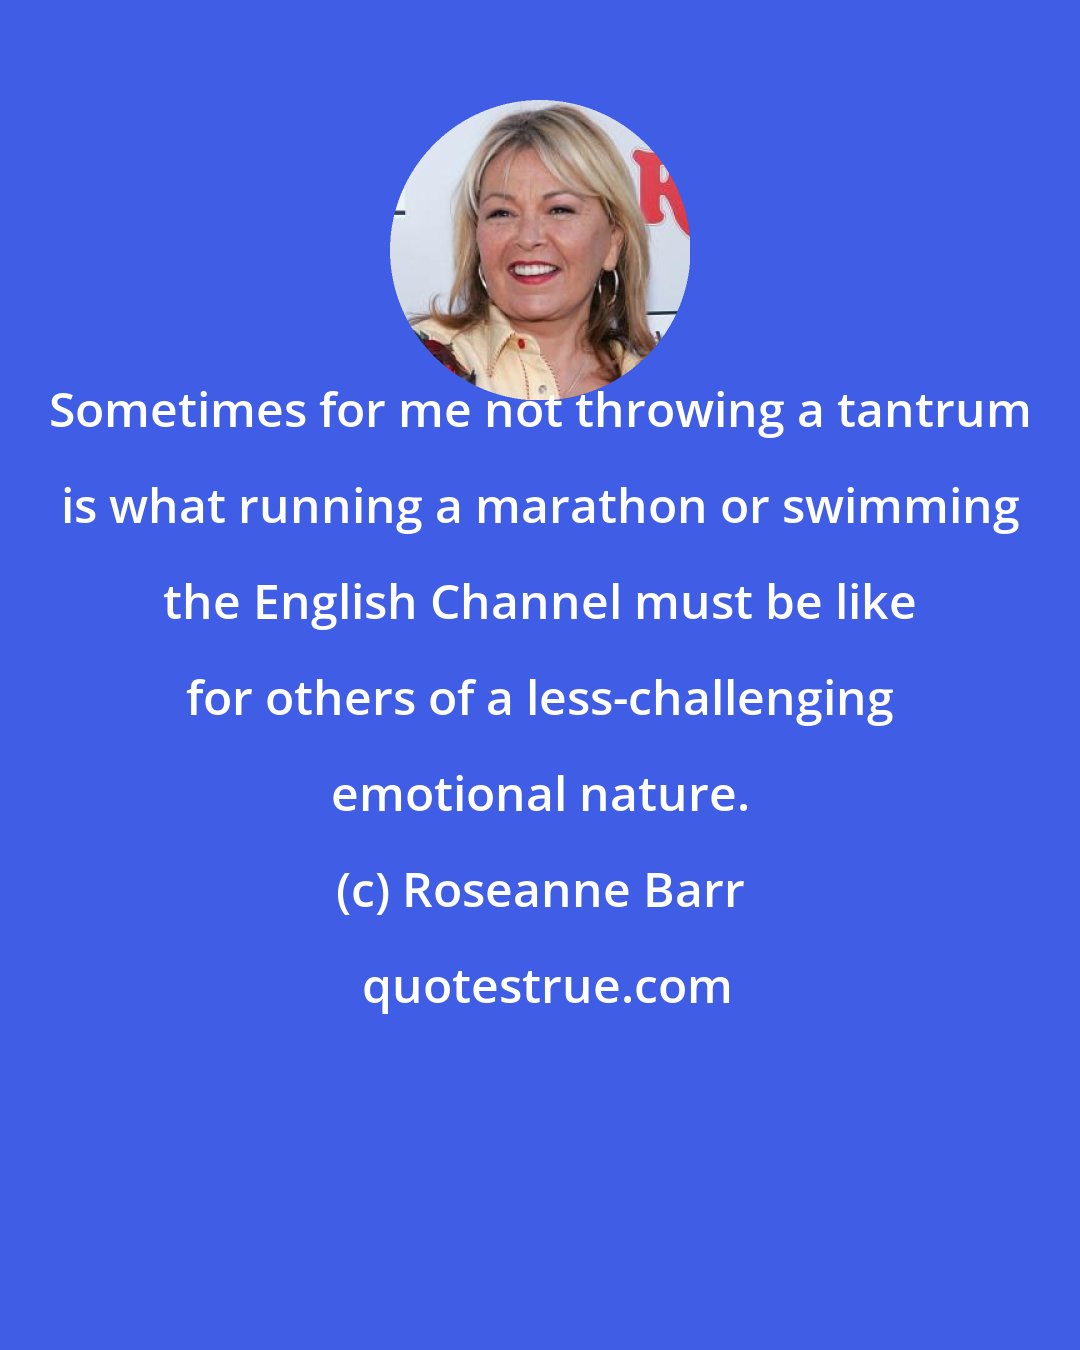 Roseanne Barr: Sometimes for me not throwing a tantrum is what running a marathon or swimming the English Channel must be like for others of a less-challenging emotional nature.